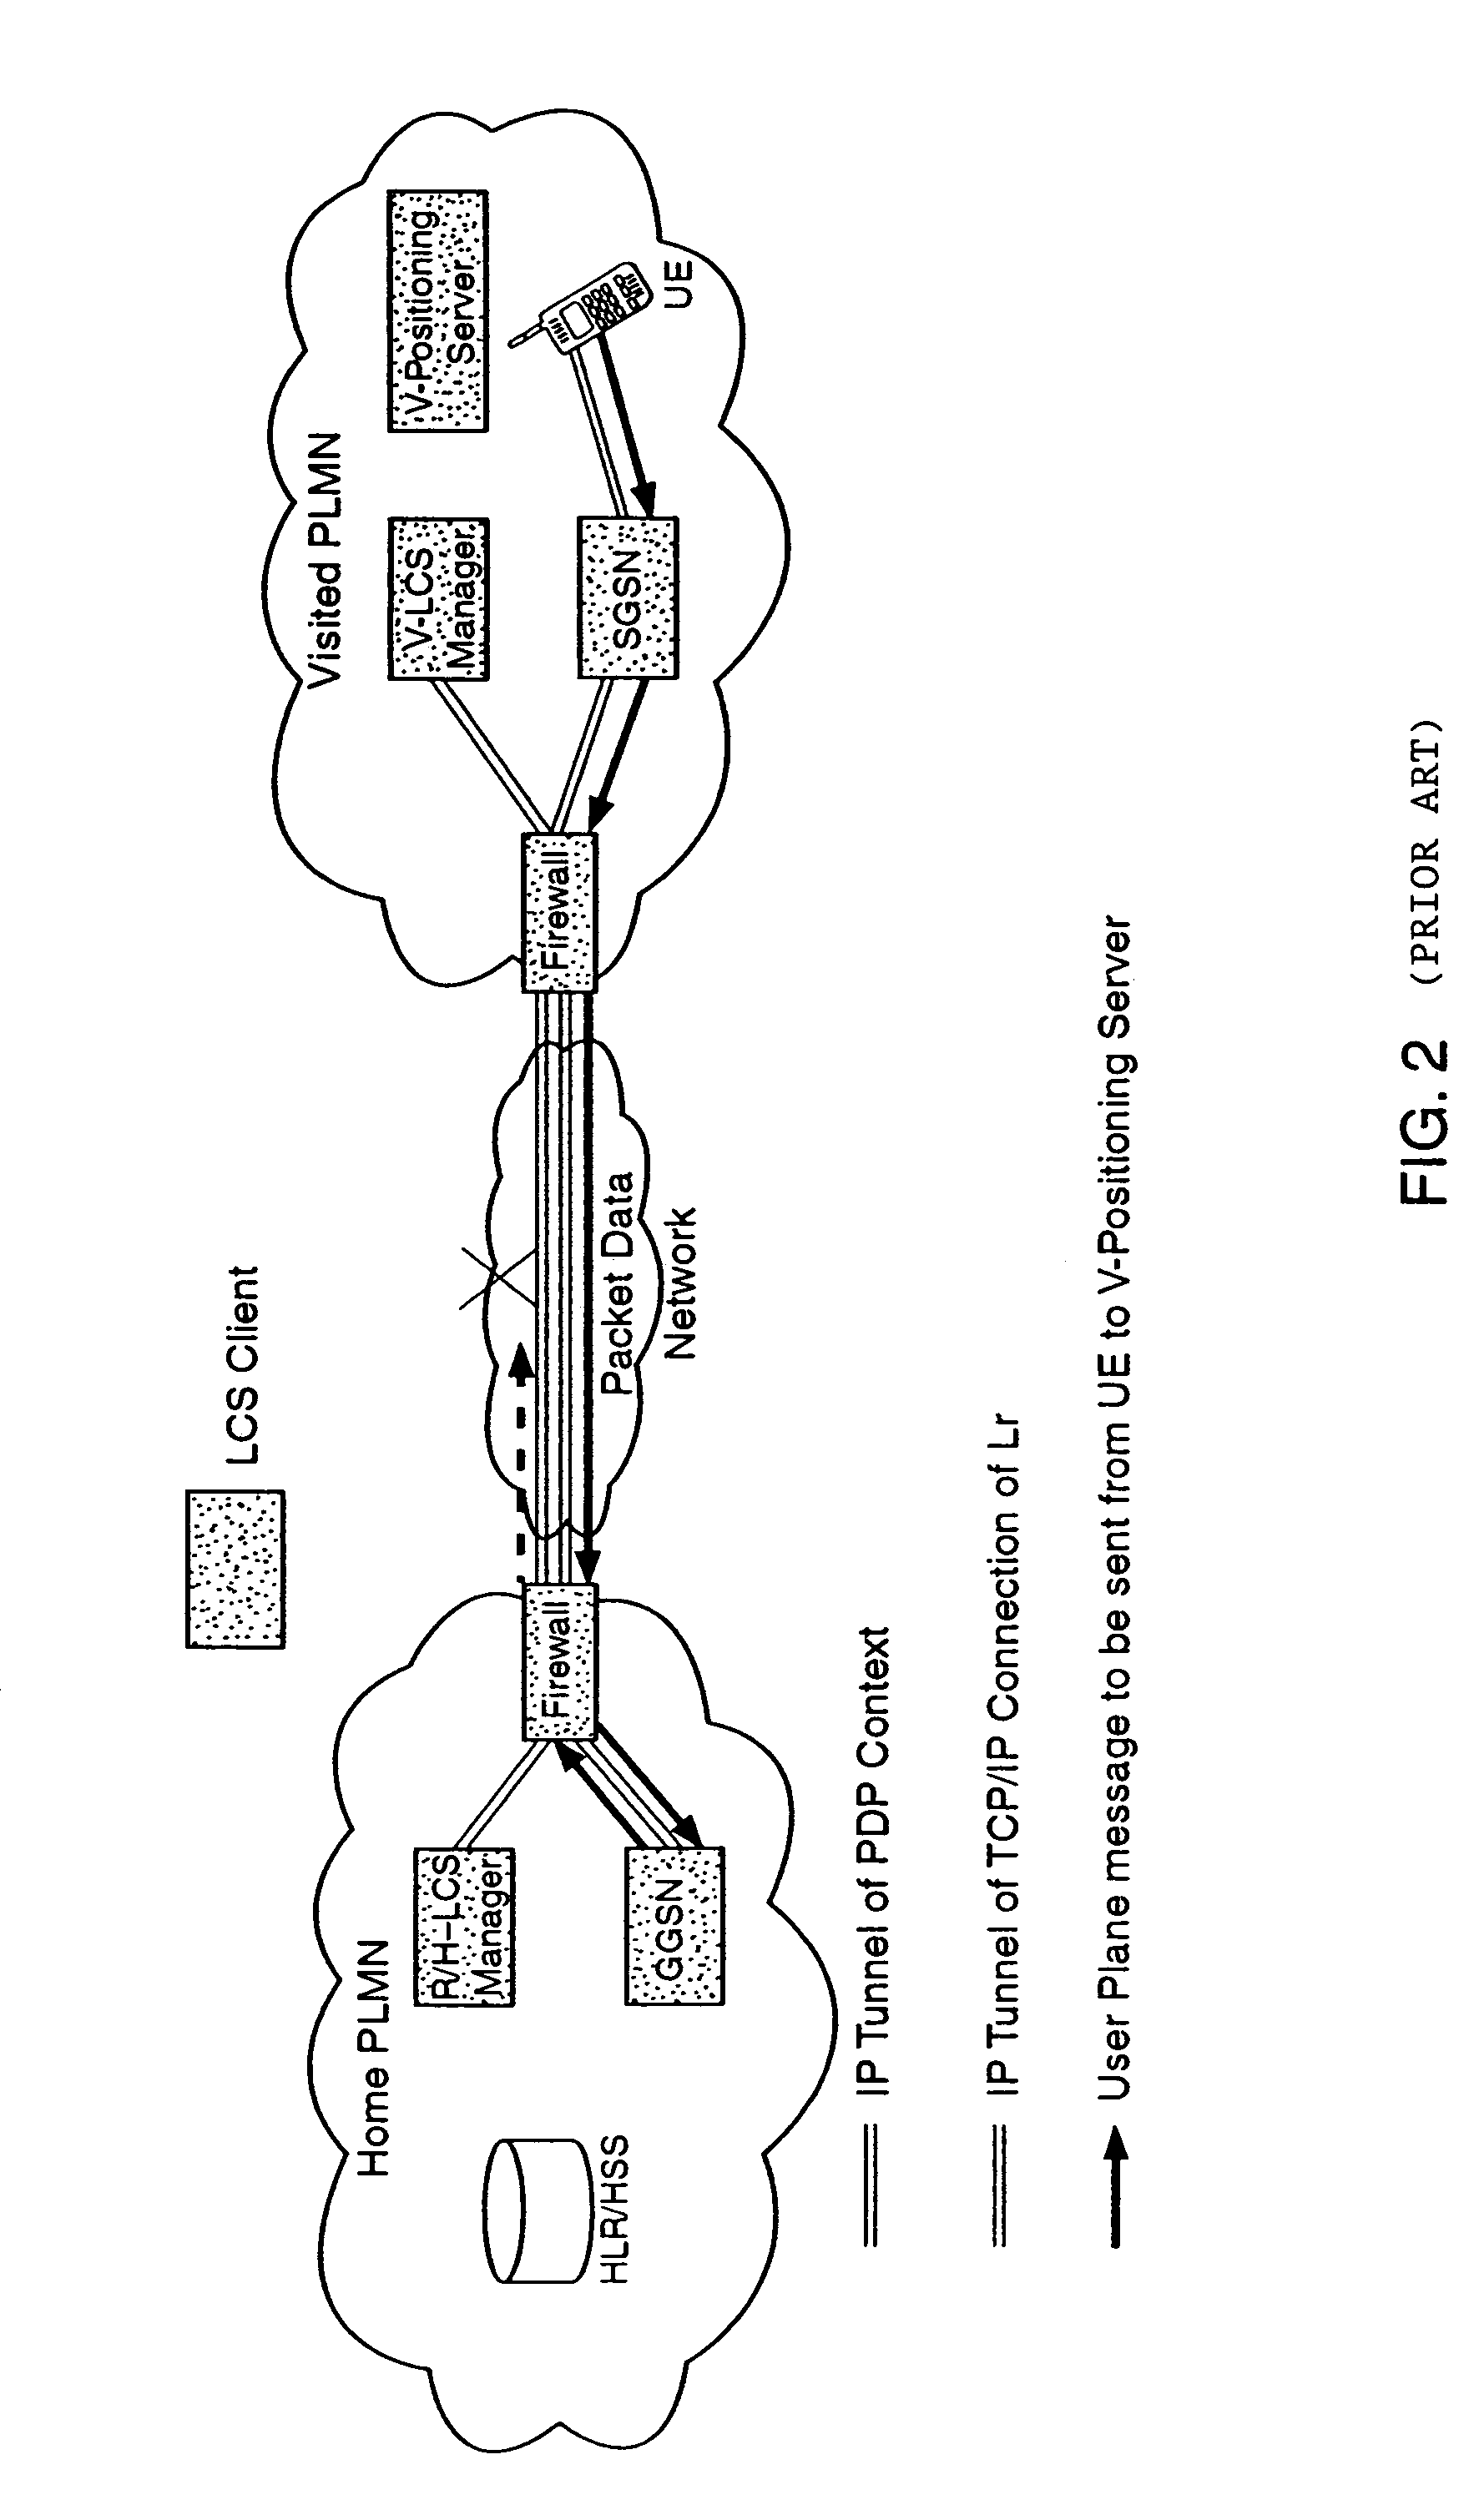 User plane location based service using message tunneling to support roaming